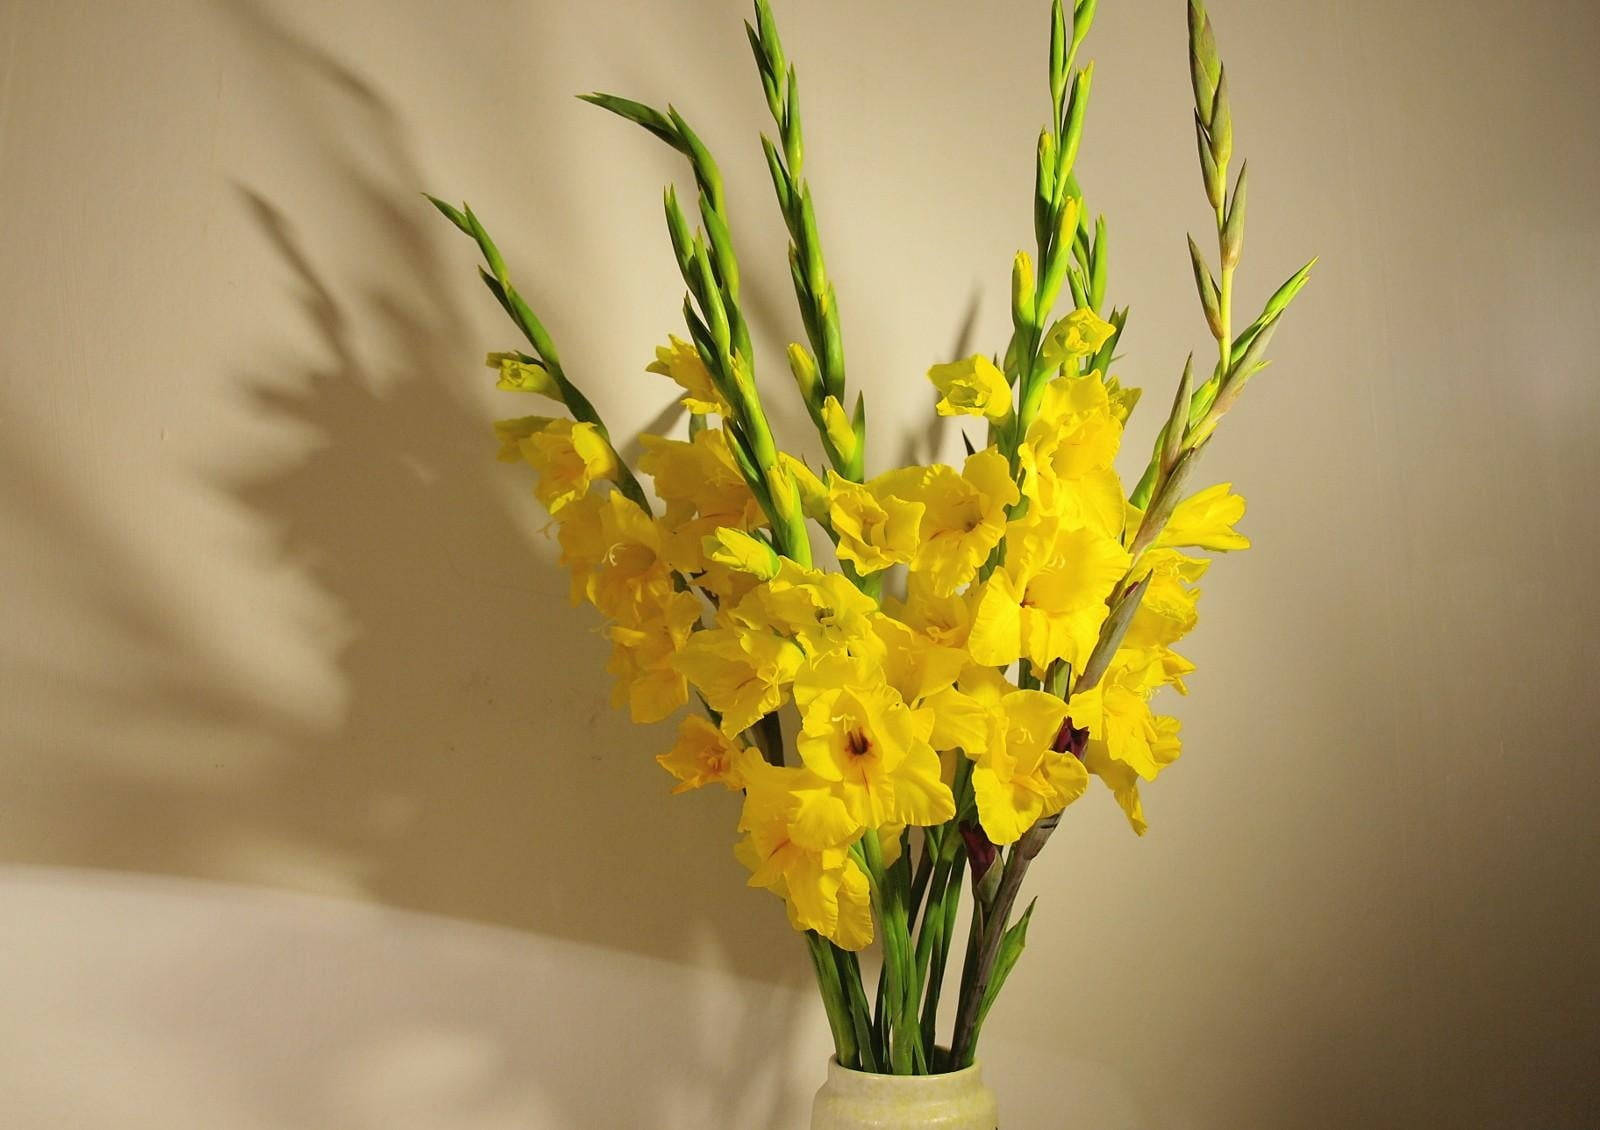 Vibrant Yellow Gladiolus Flowers in a Vase Wallpaper